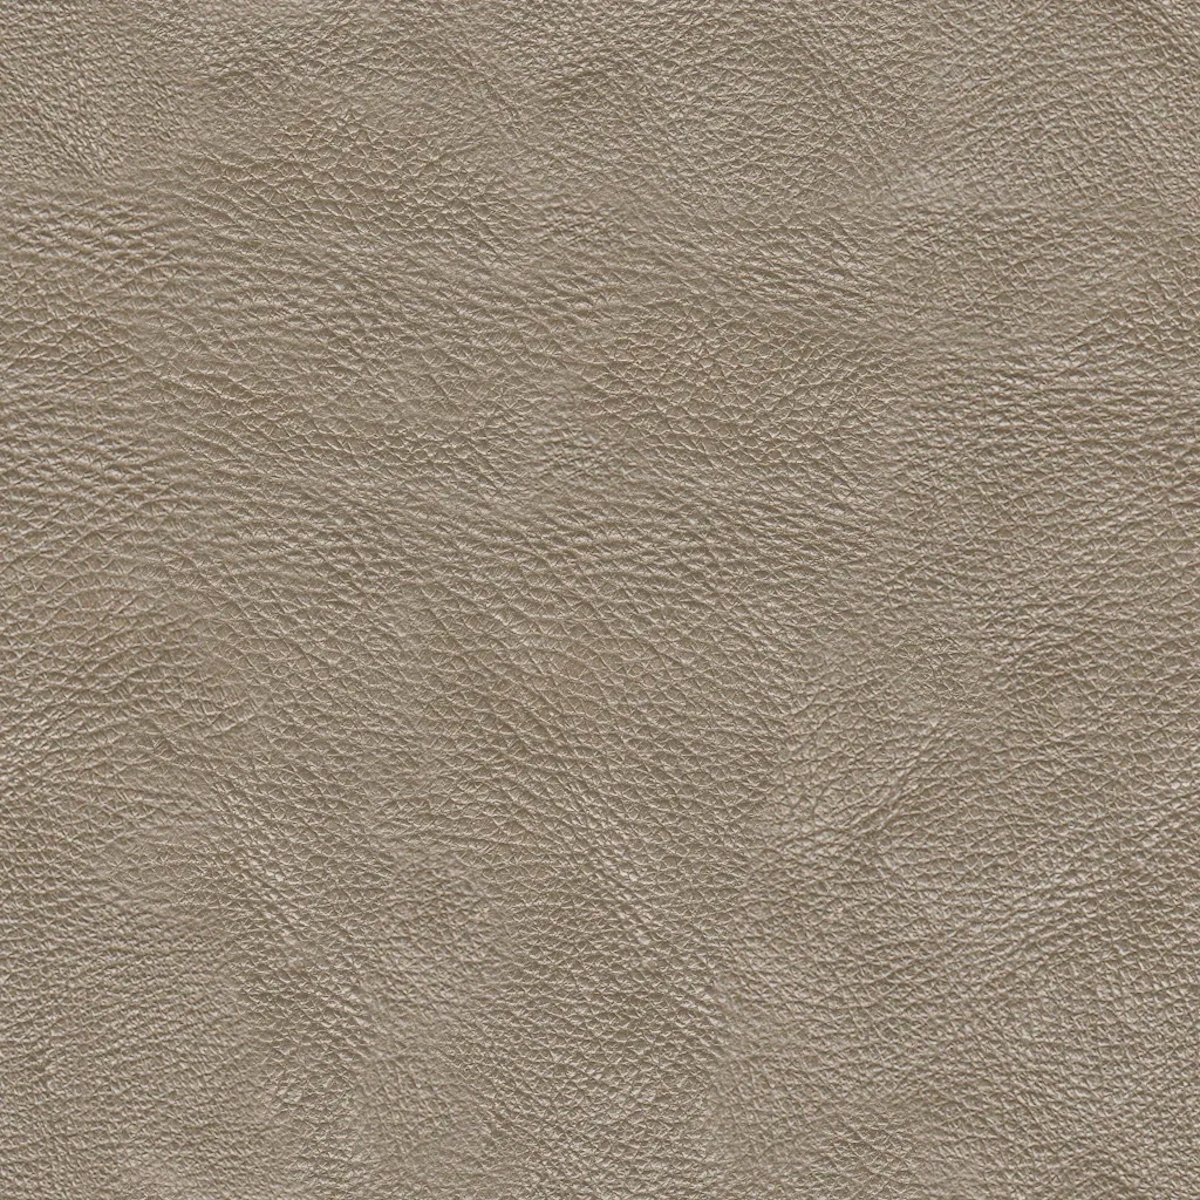 Leather upholstery textile swatch